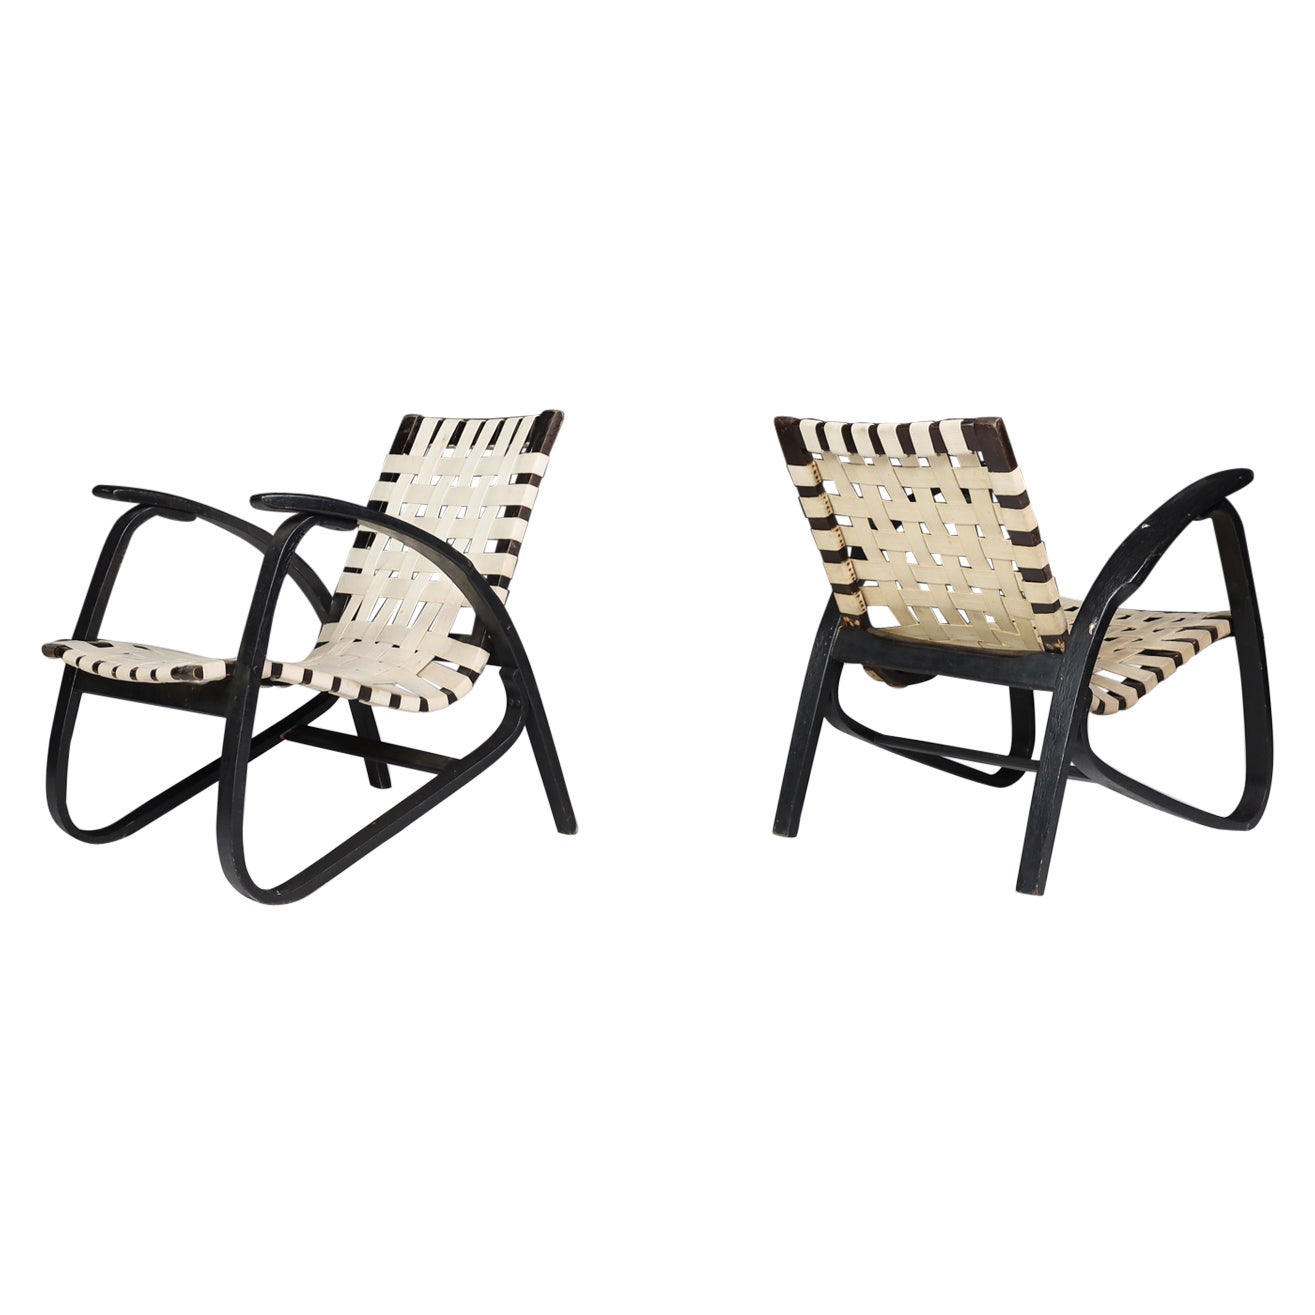 Jan Vaněk Pair of Lounge Chairs in Bentwood and Canvas Straps Praque, 1940s